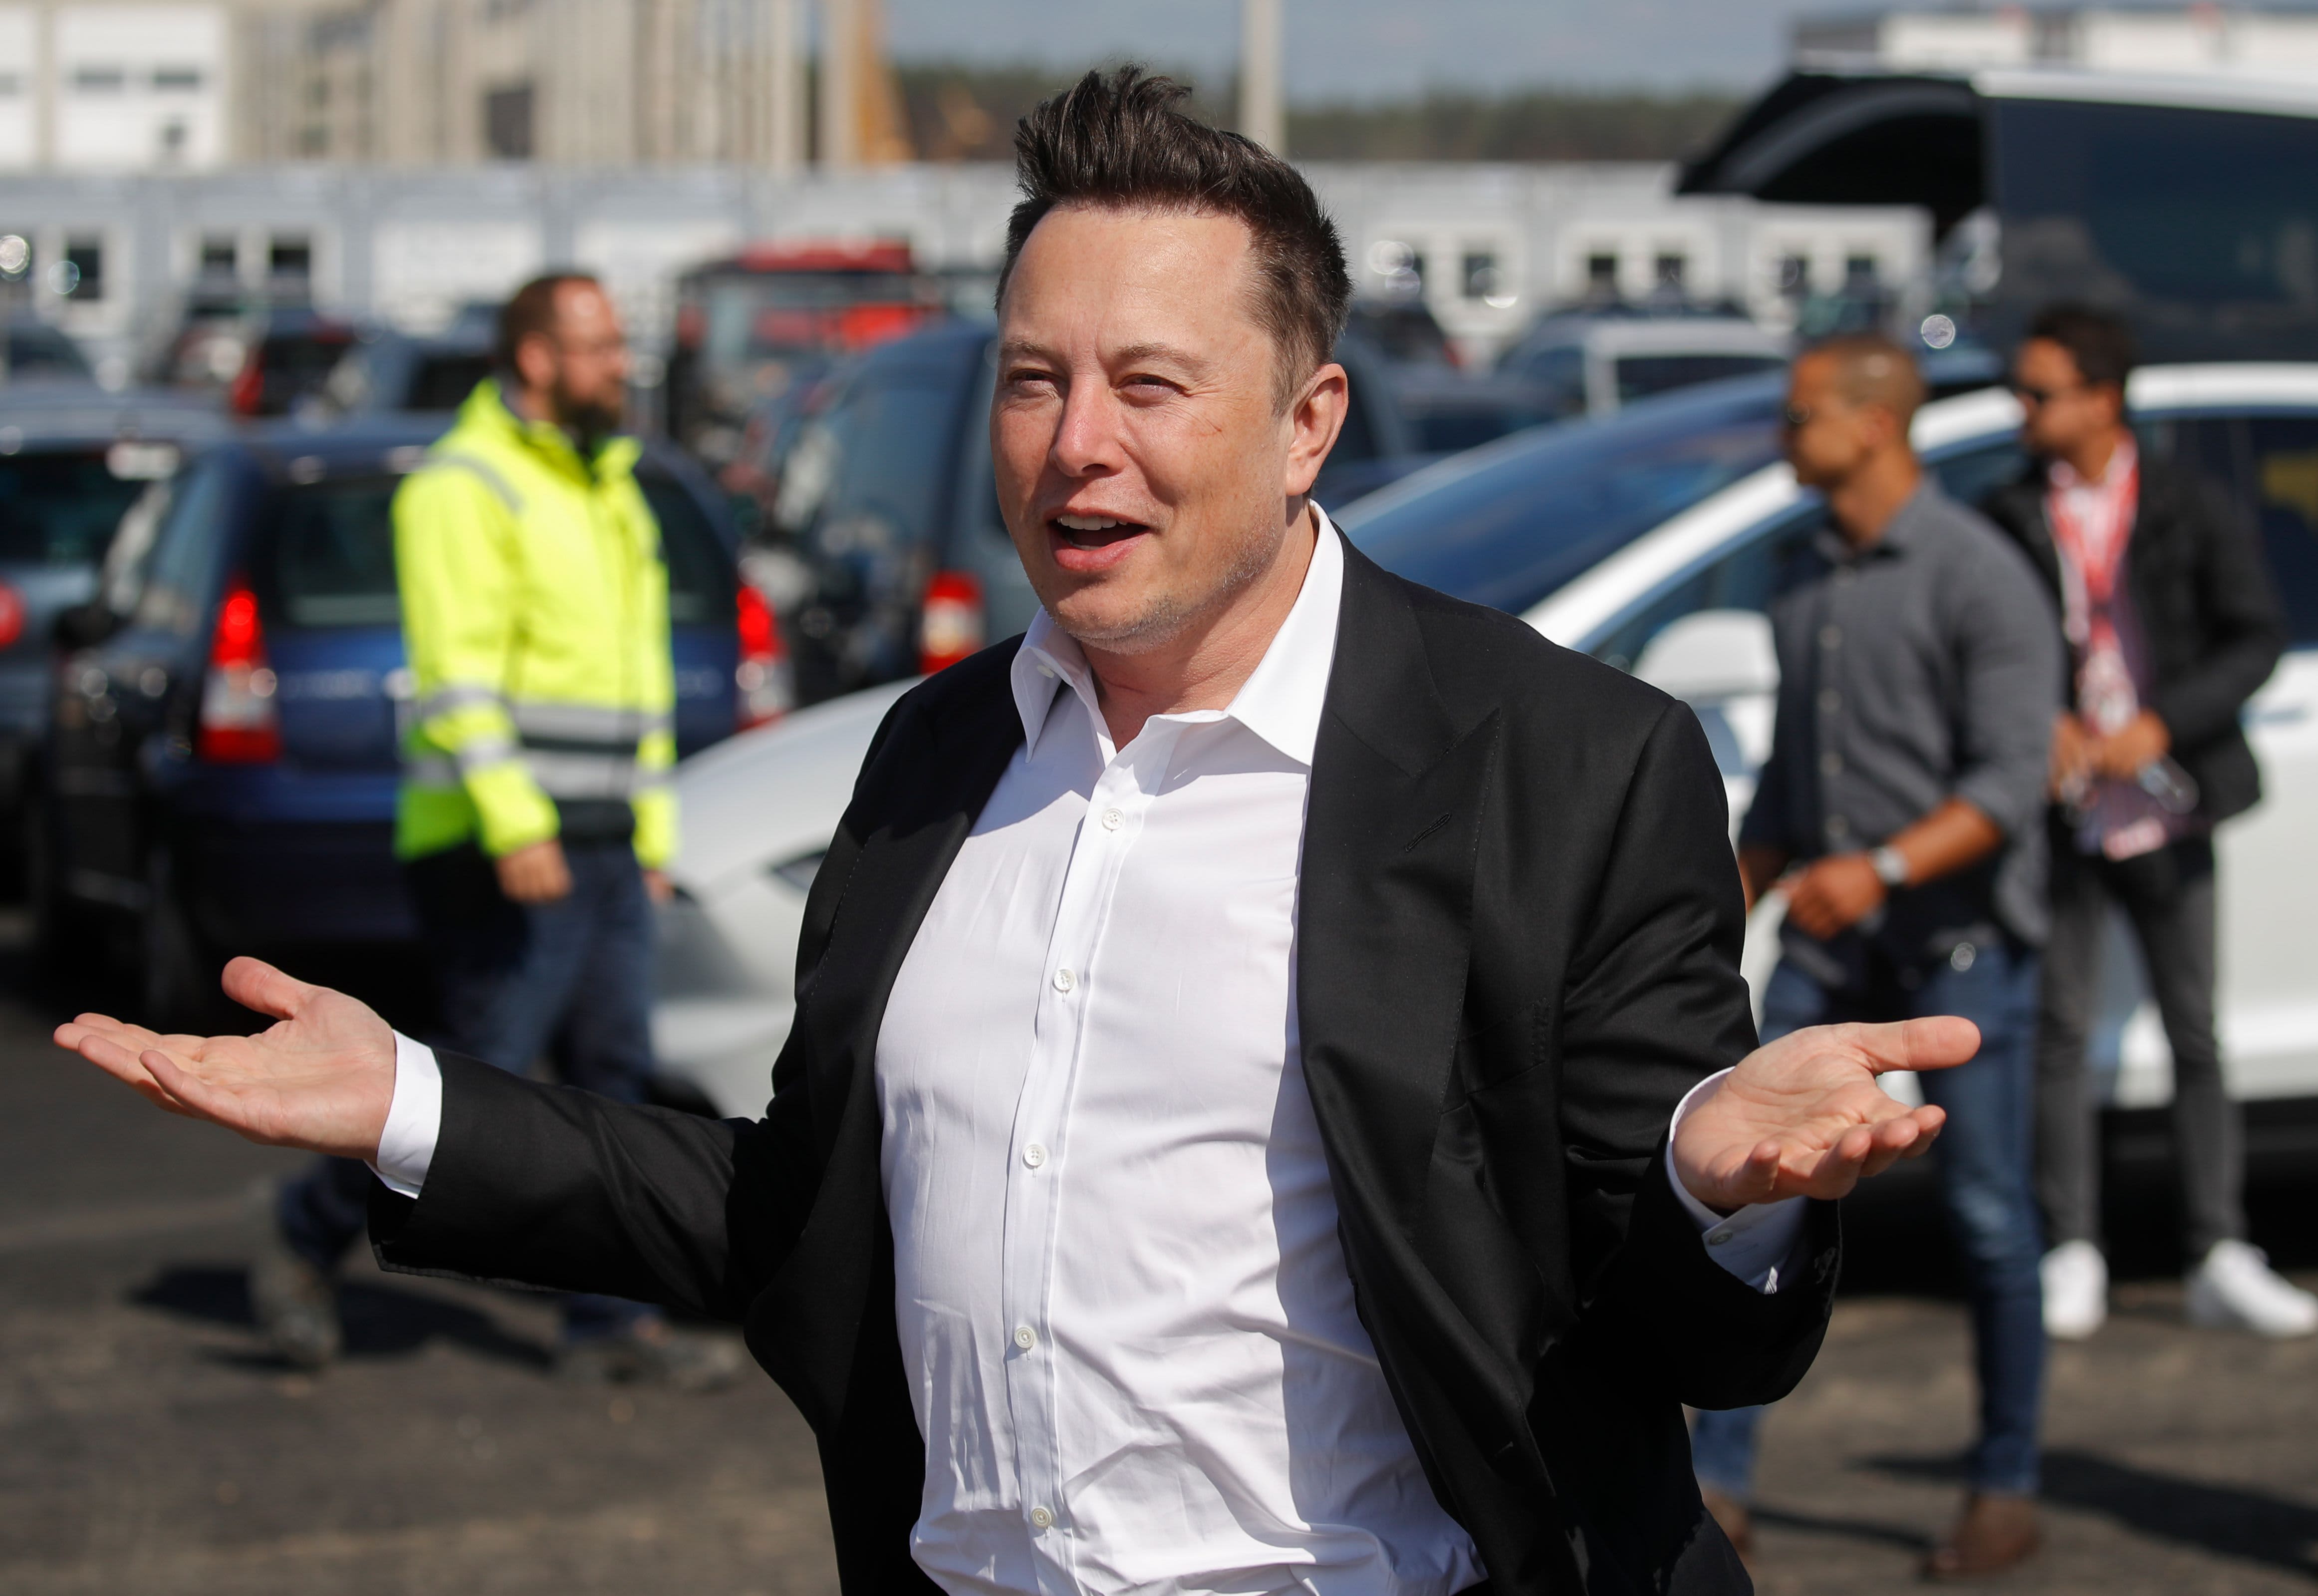 Tesla says the SEC delivered another subpoena in ongoing conflict over Musk tweets